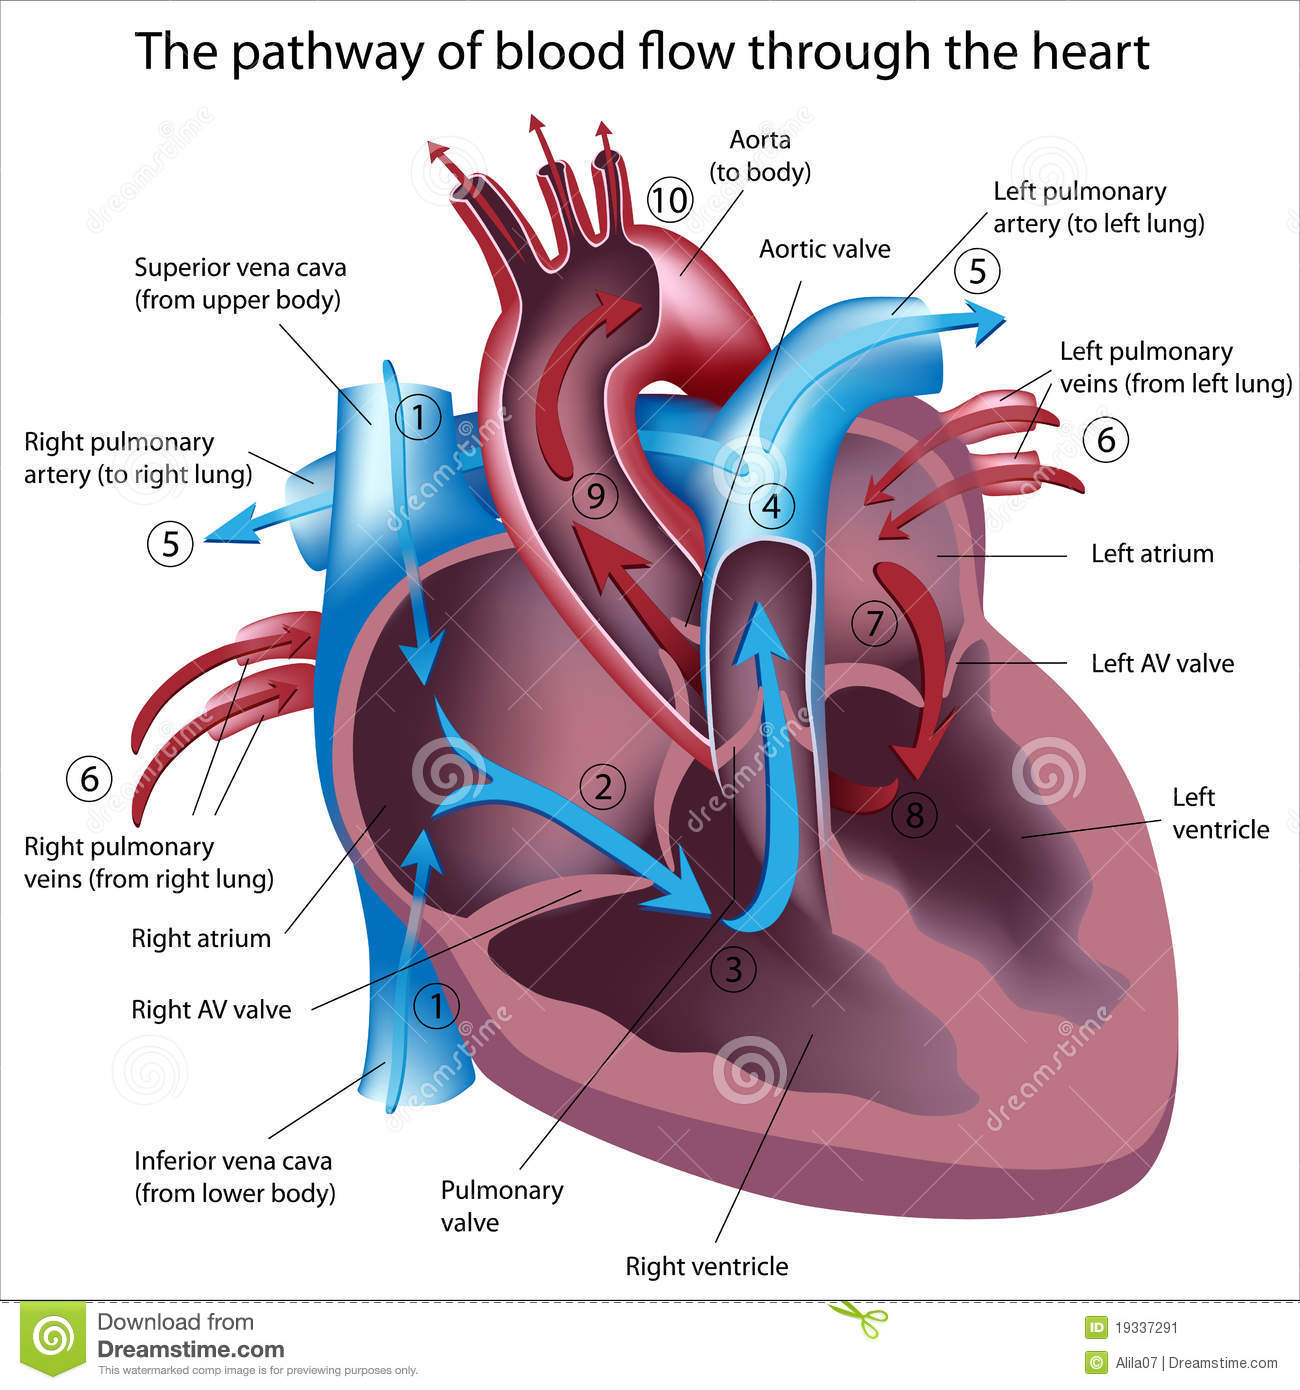 Blood Flow Through The Heart Diagram Which Chamber Of The Heart Receives Deoxygenated Blood From The Body